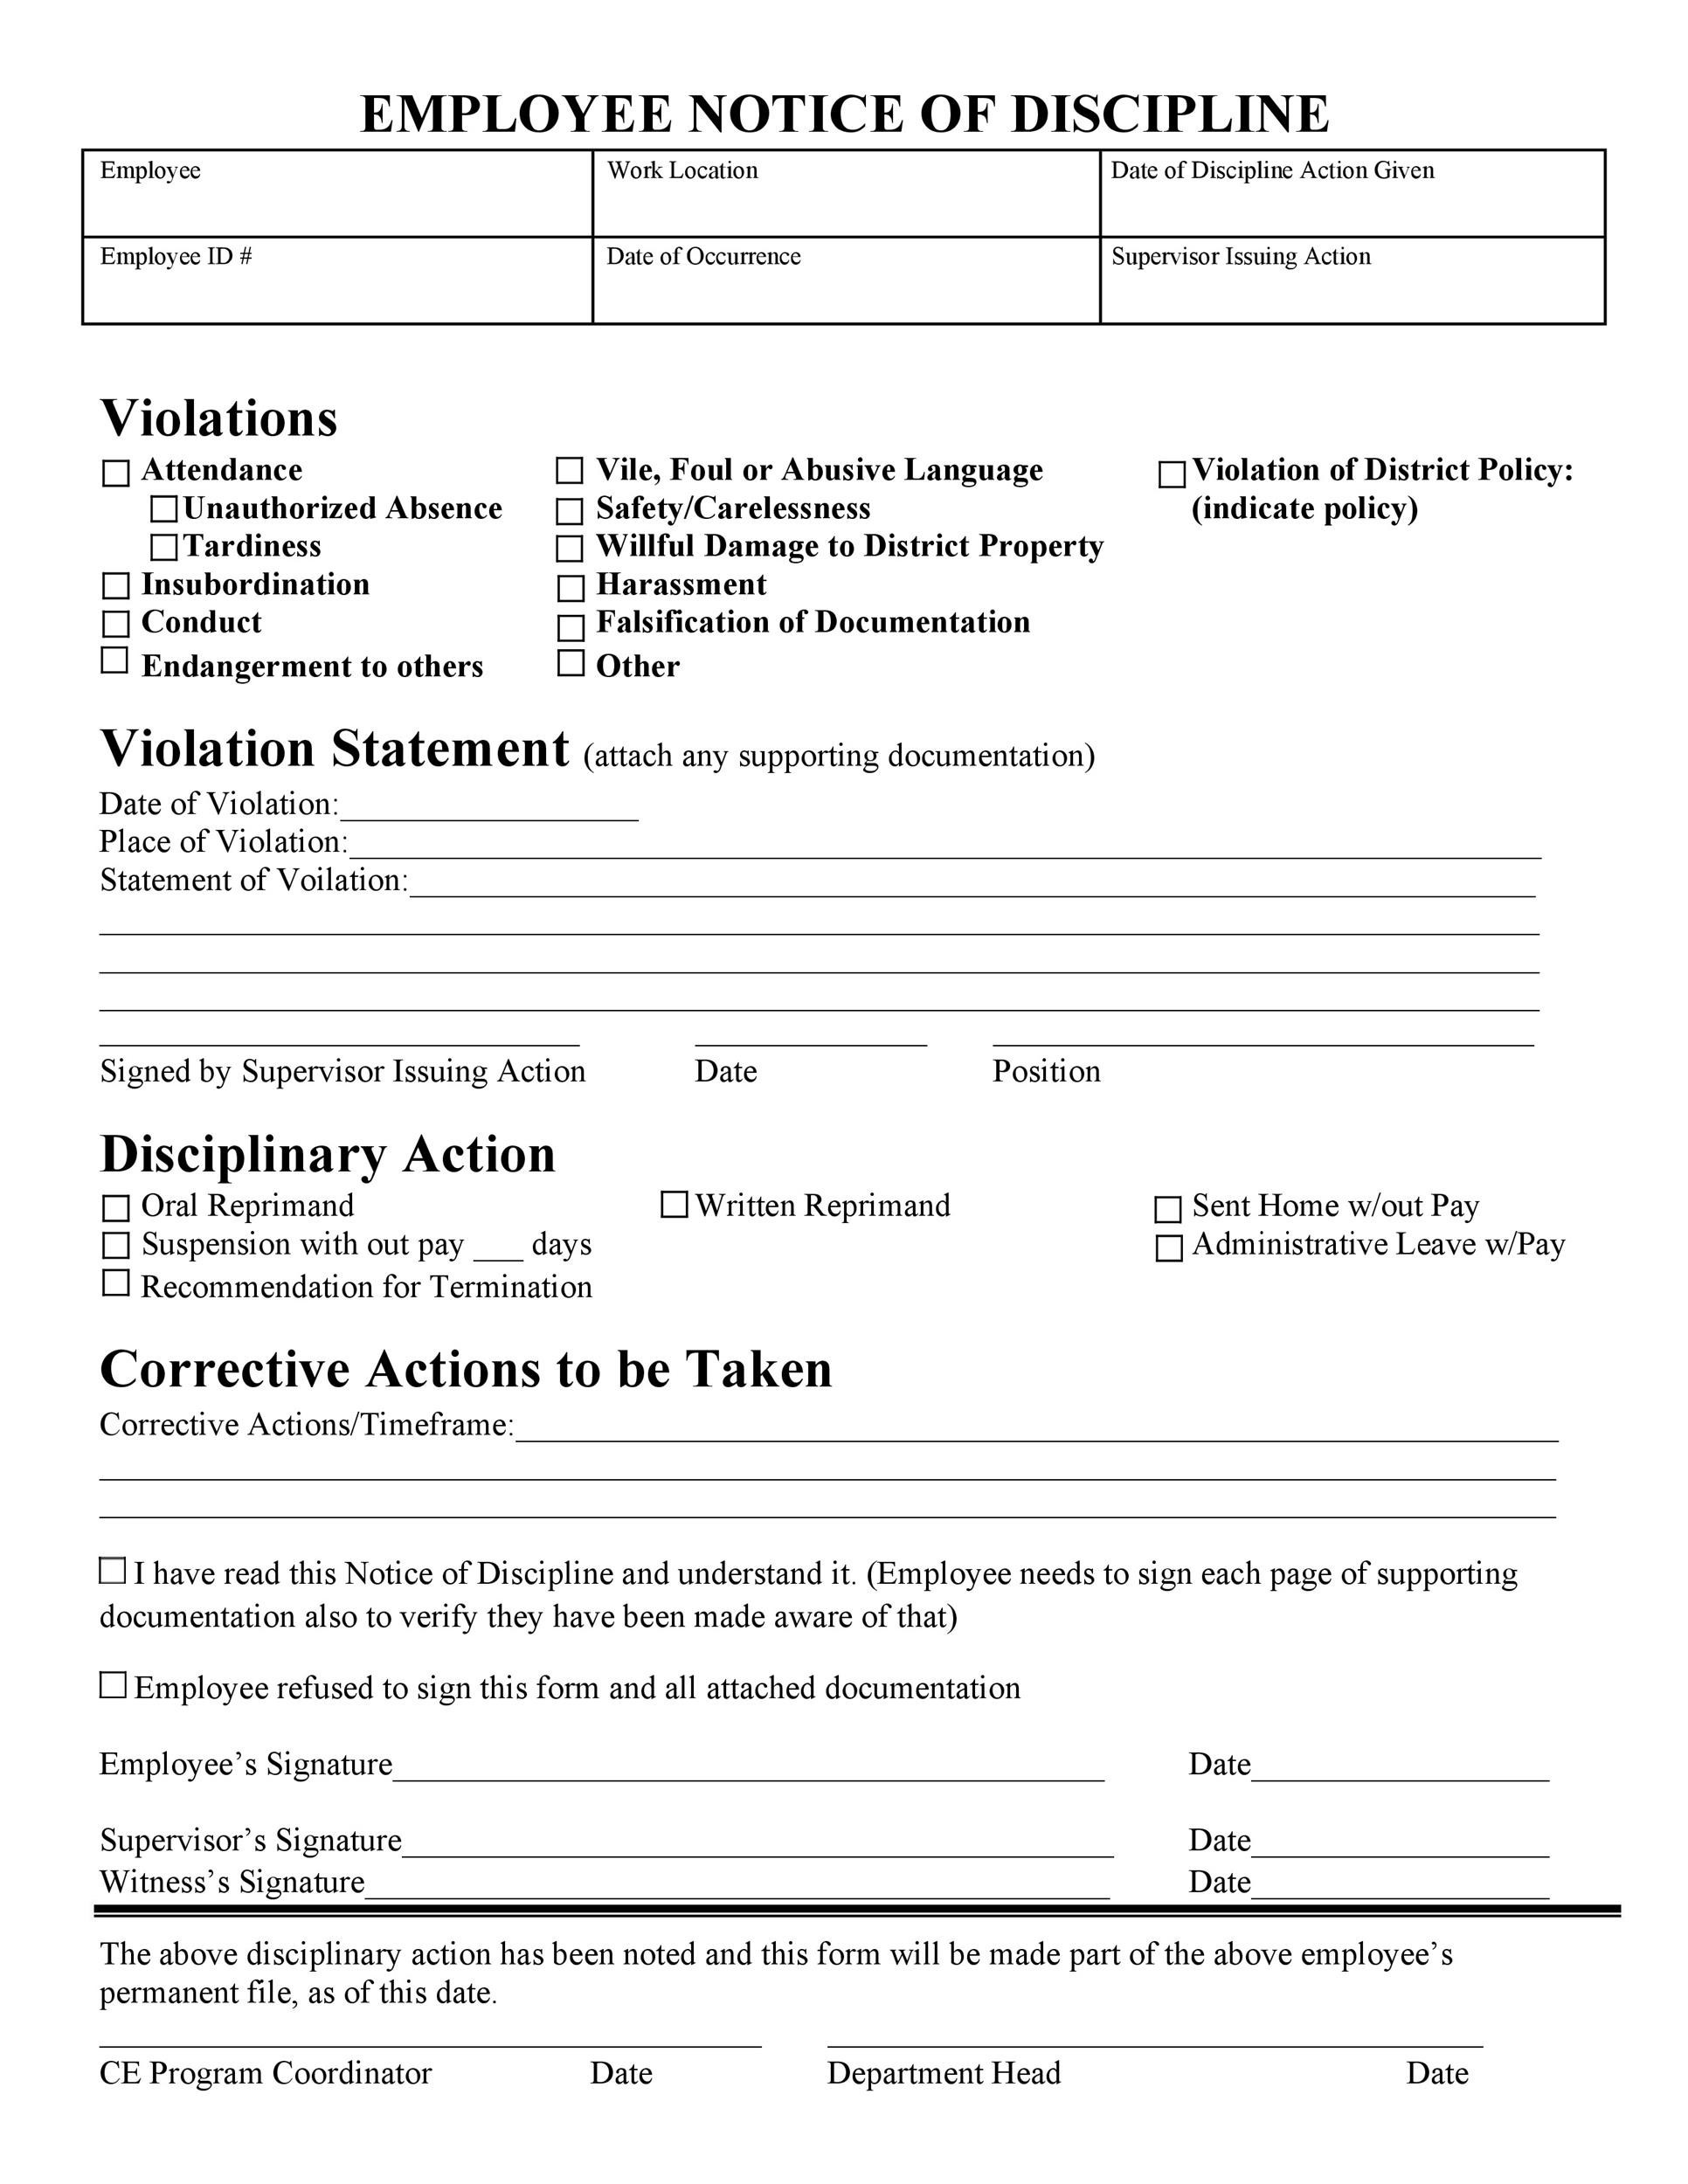 40-employee-disciplinary-action-forms-template-lab